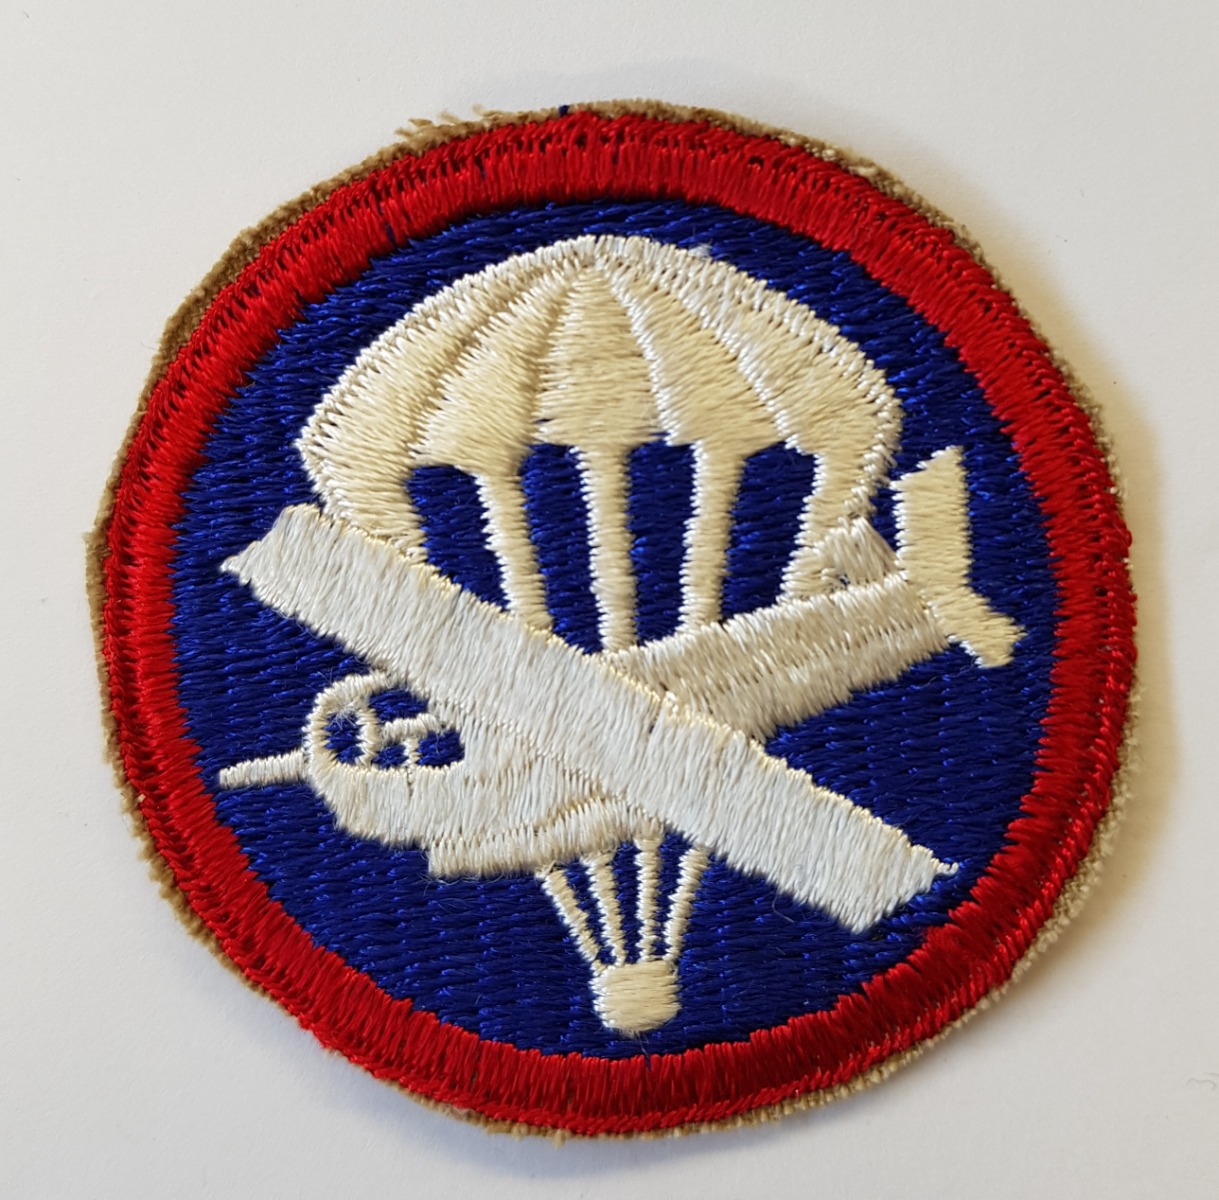 US WWII AIRBORNE EM COMBINED GLIDER PARACHUTE CAP PATCH